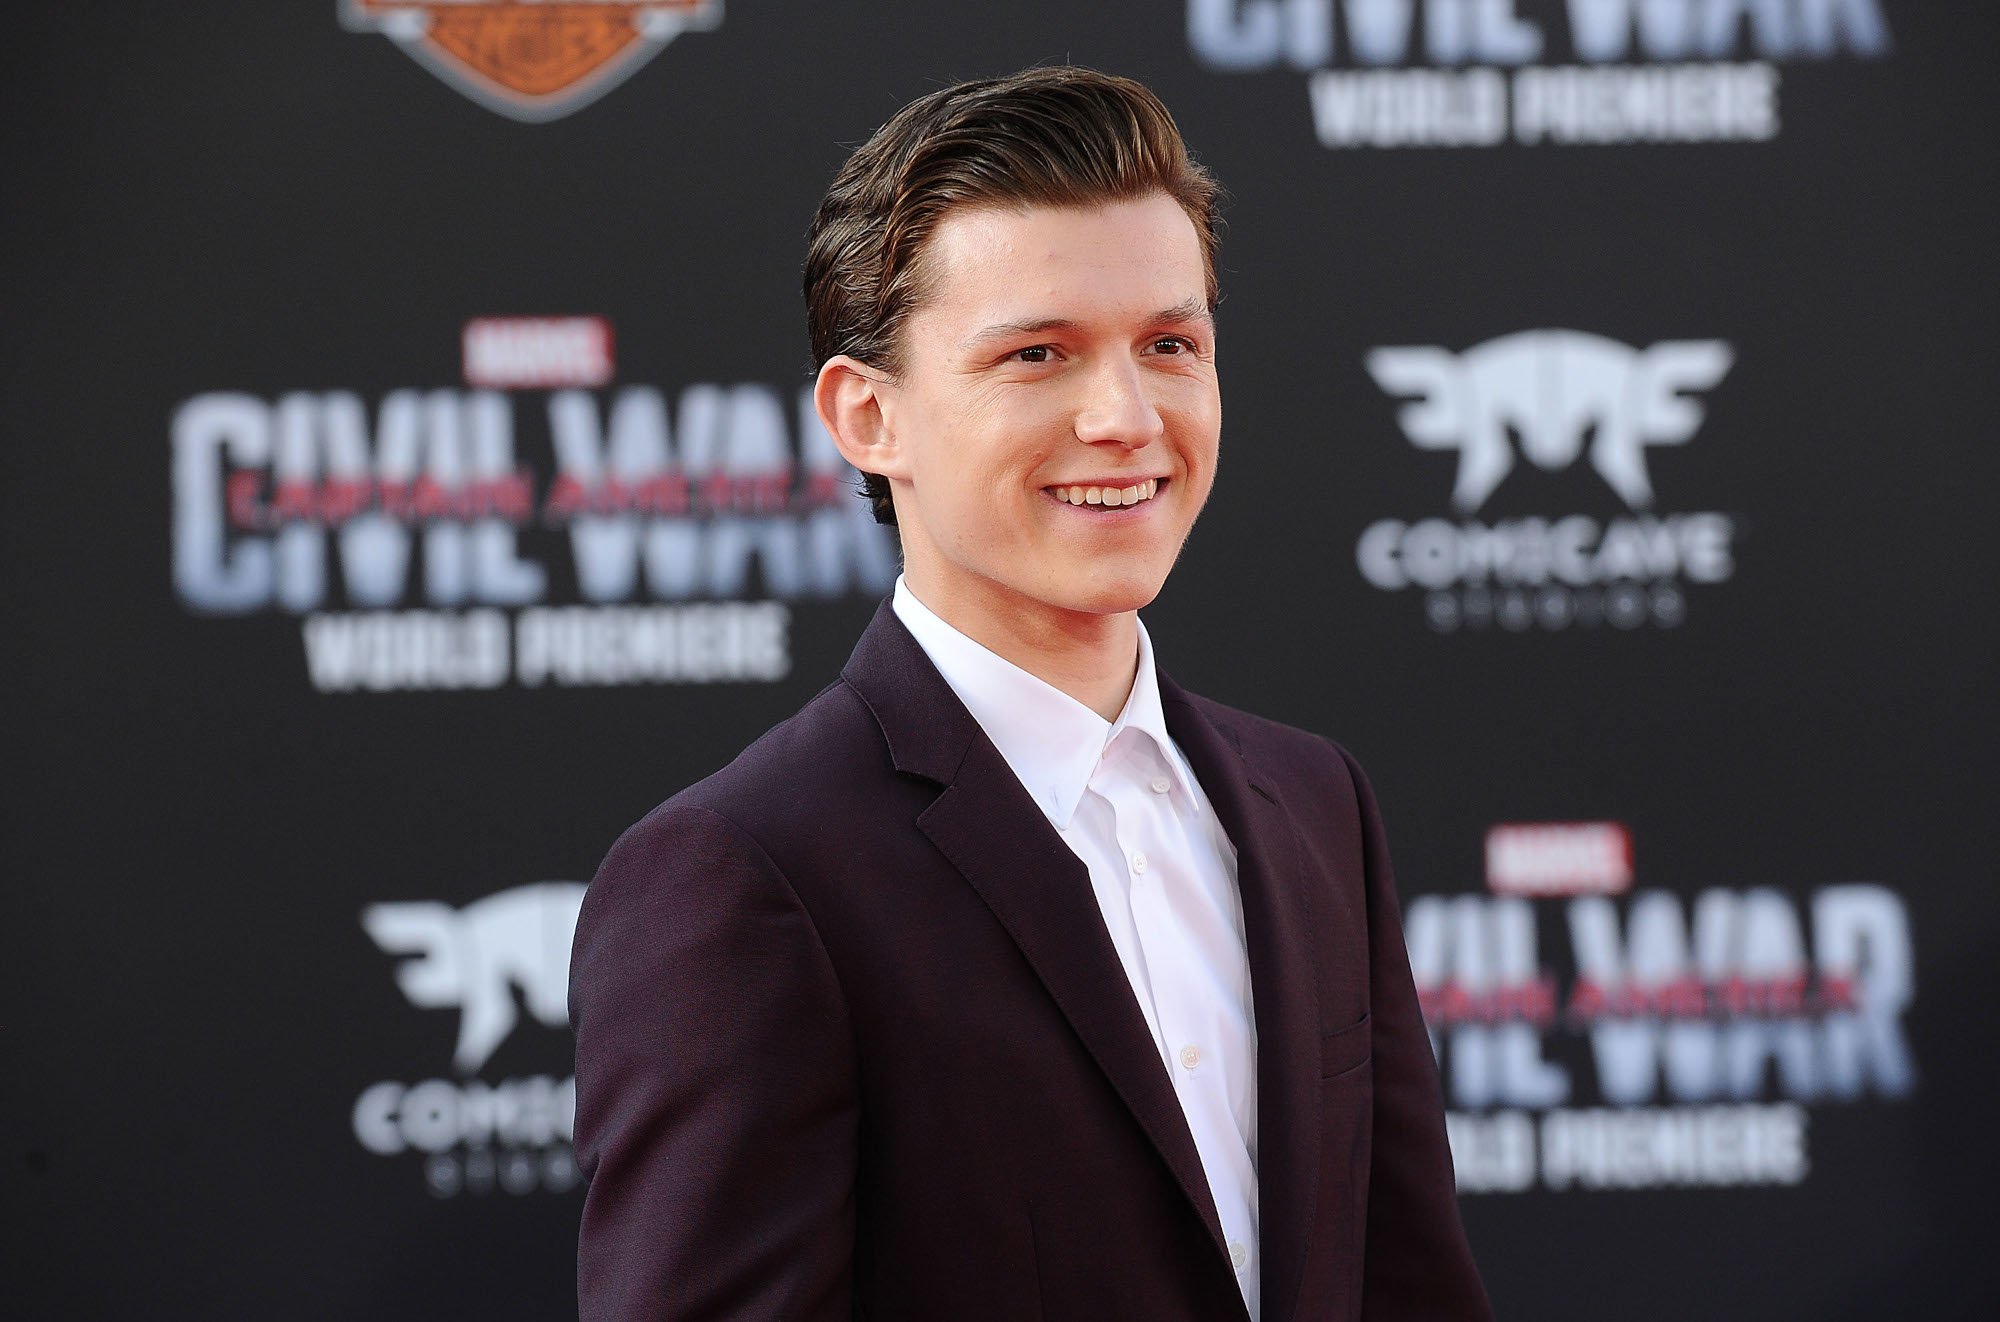 Spider-Man actor Tom Holland wearing a black suit and white shirt at the premiere for 'Captain America: Civil War.' Will Tom Holland's Peter Parker continue appearing in the MCU?